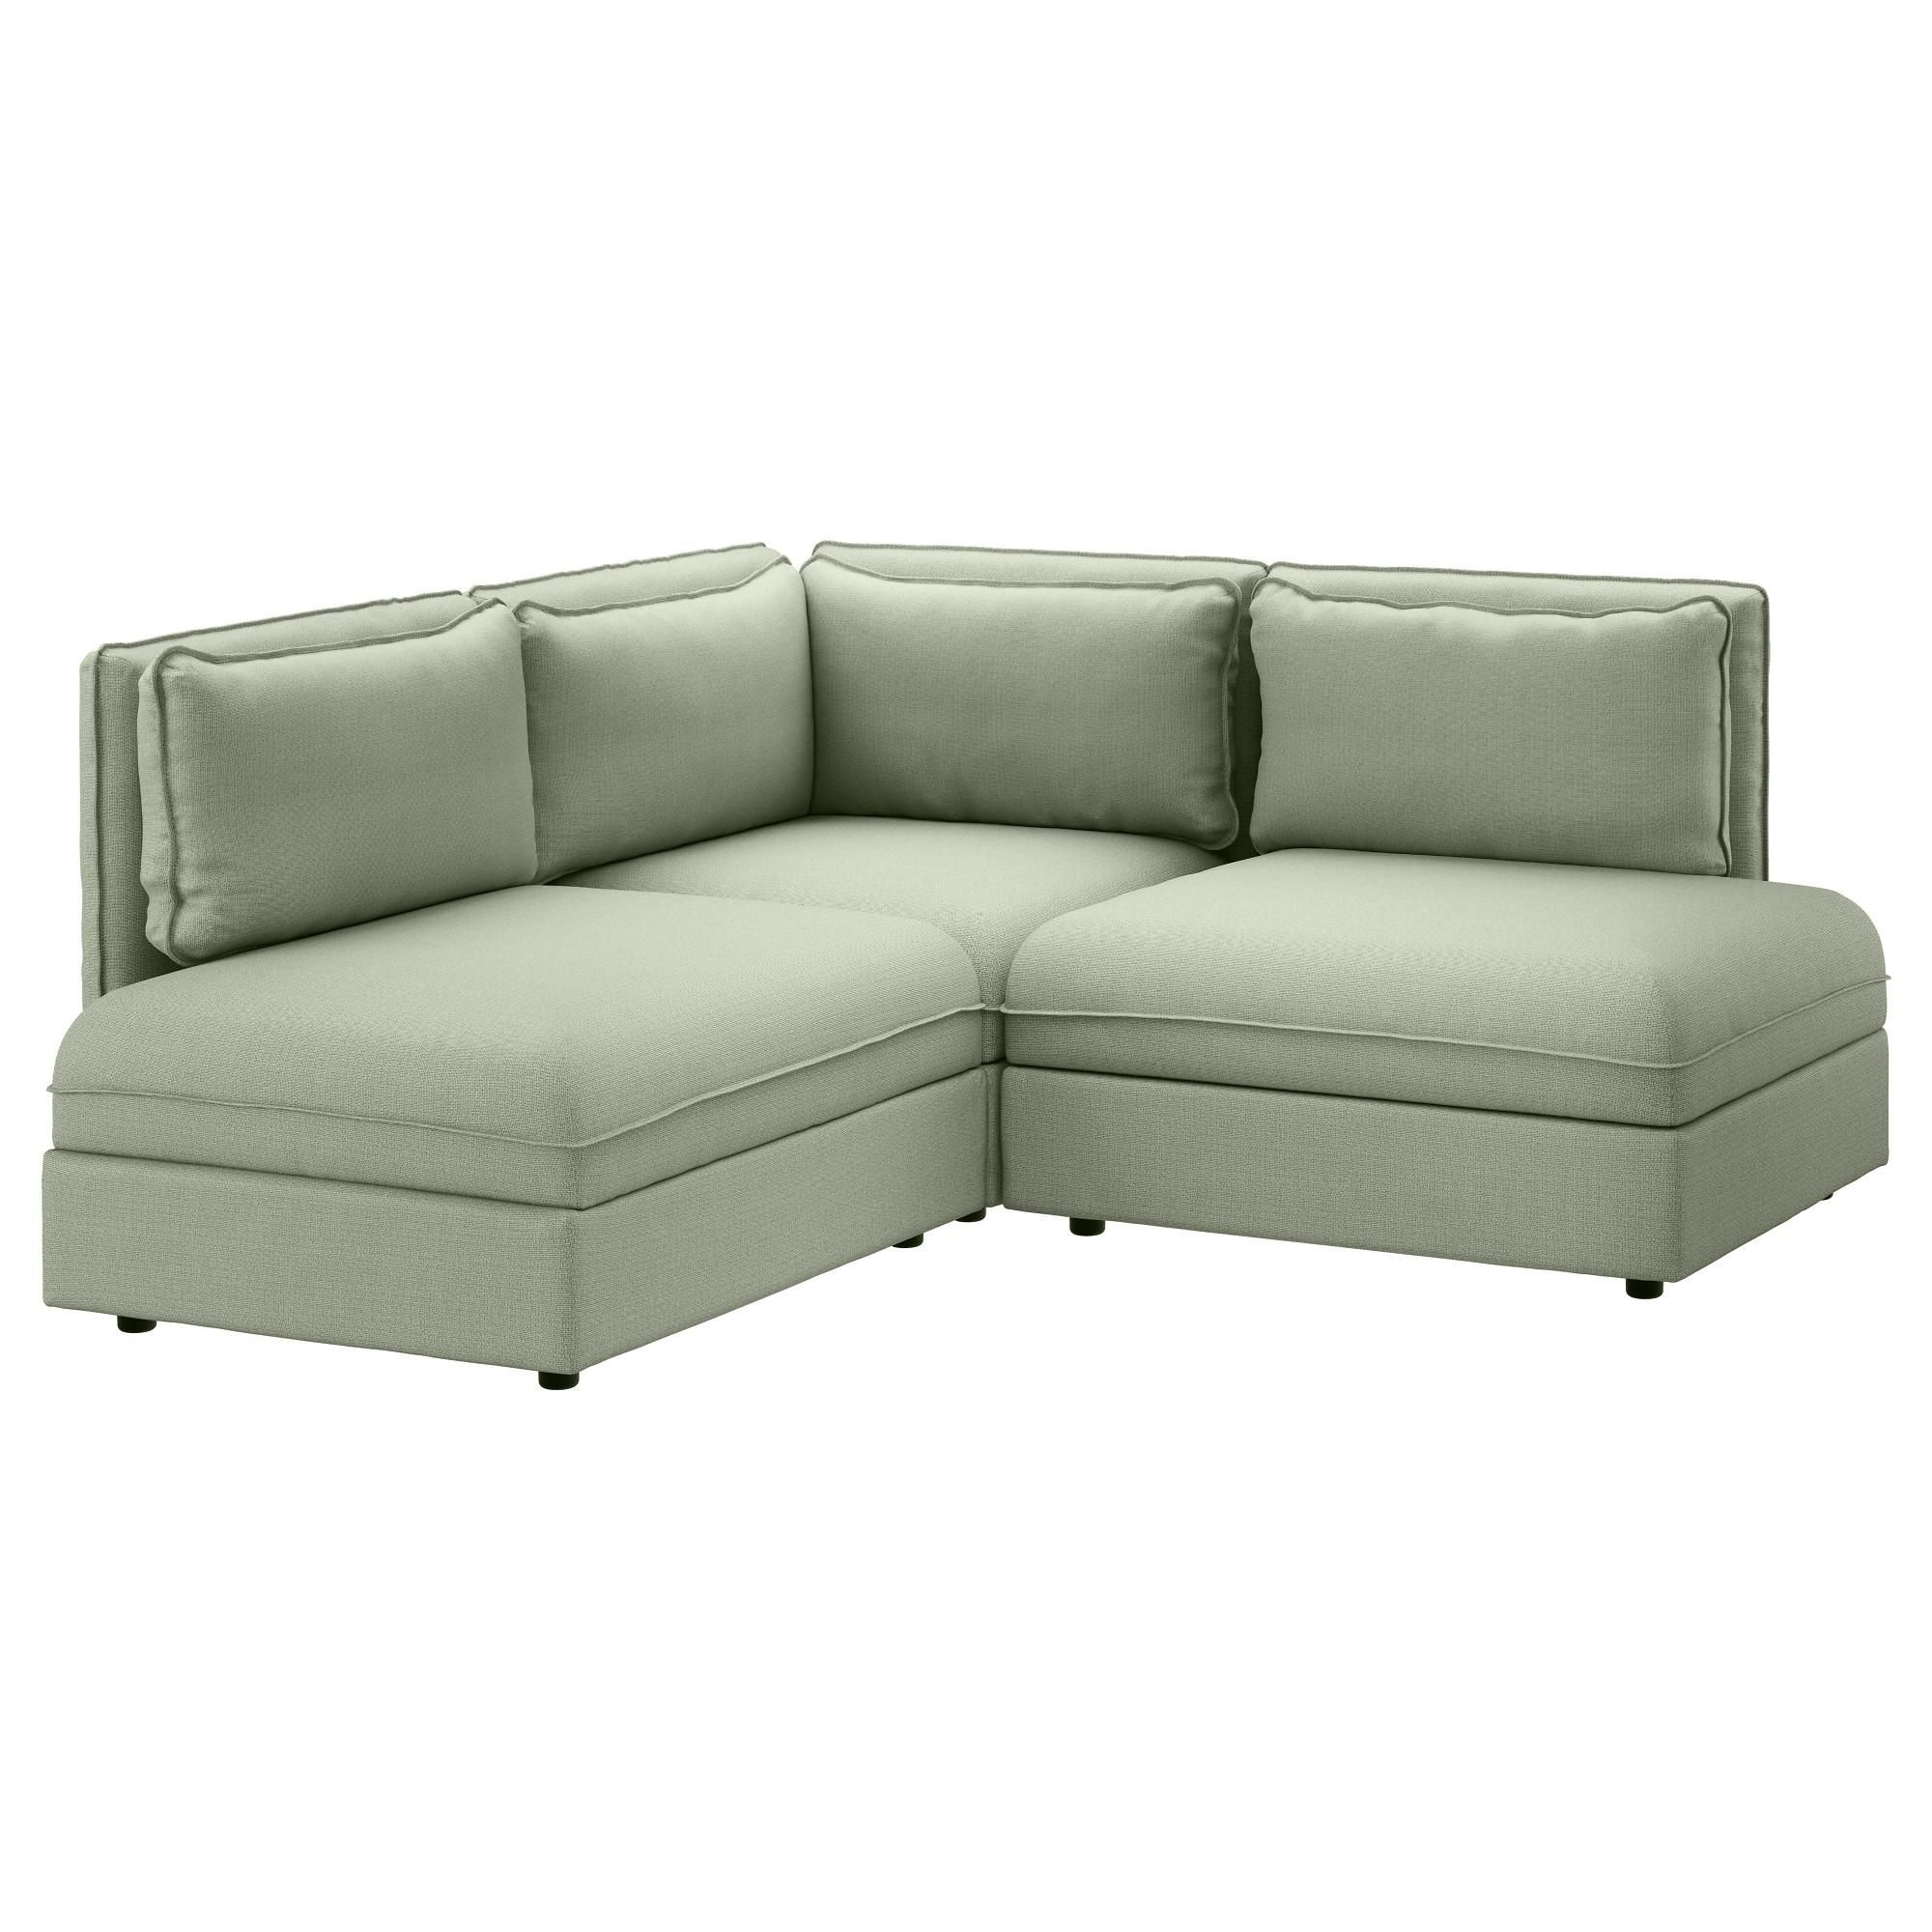 Sectional Sofas & Couches – Ikea Intended For Apartment Sofa Sectional (View 13 of 15)